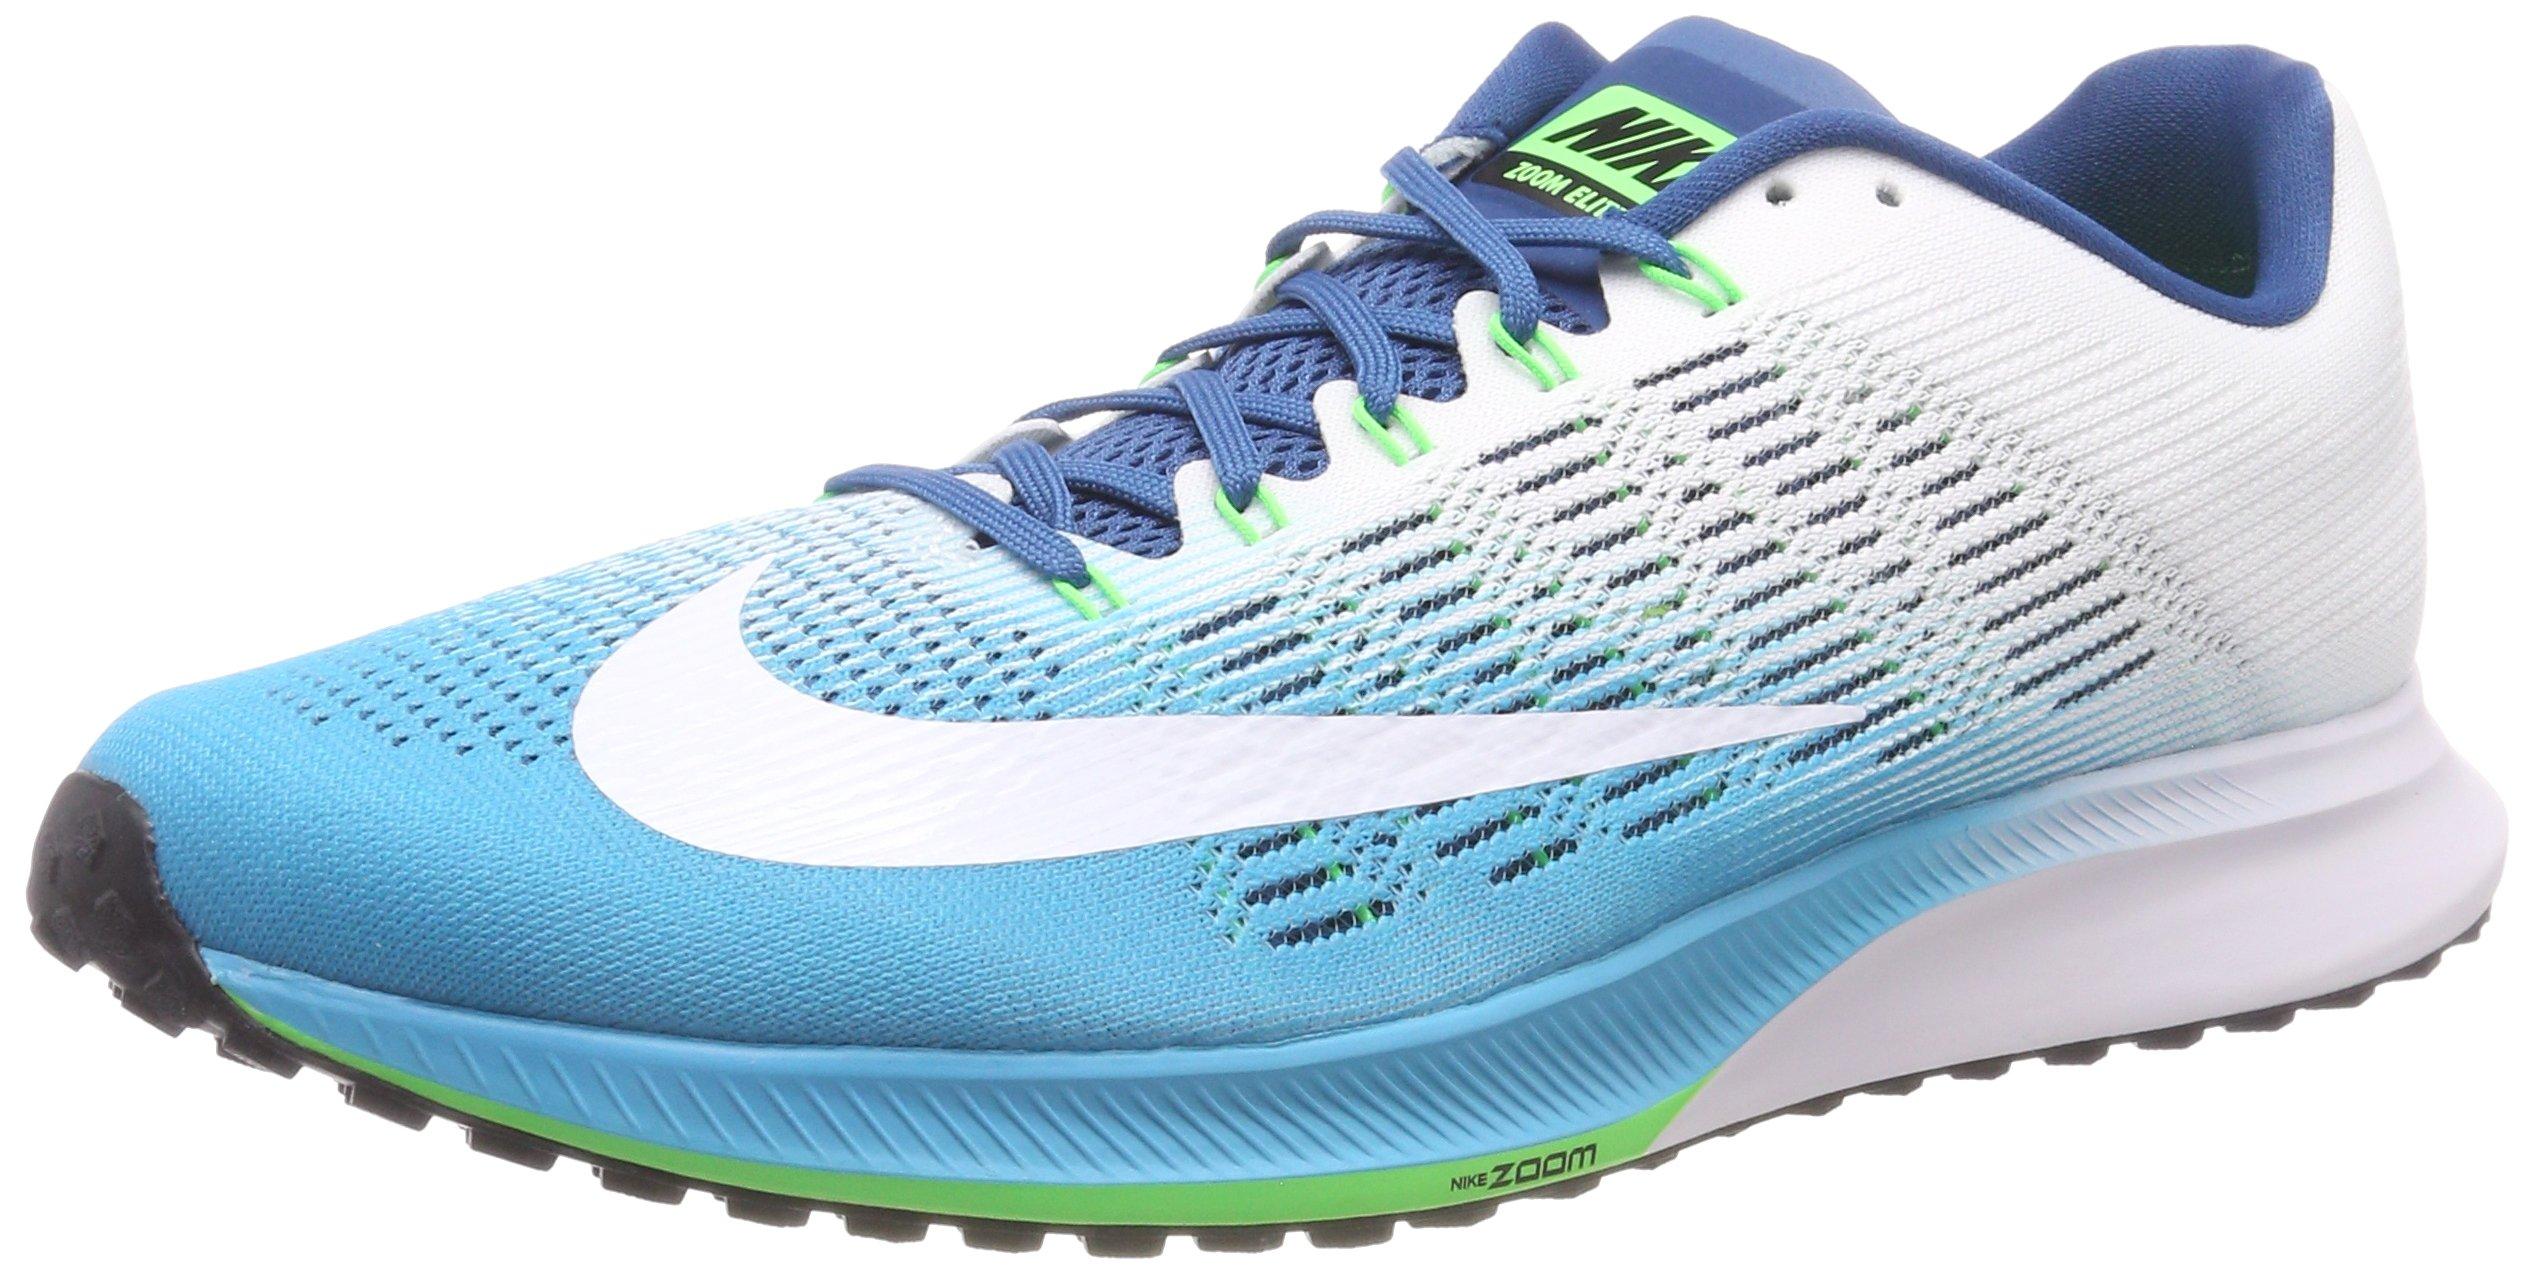 Nike Air Zoom Elite 9 Running Shoes in Blue for Men - Lyst